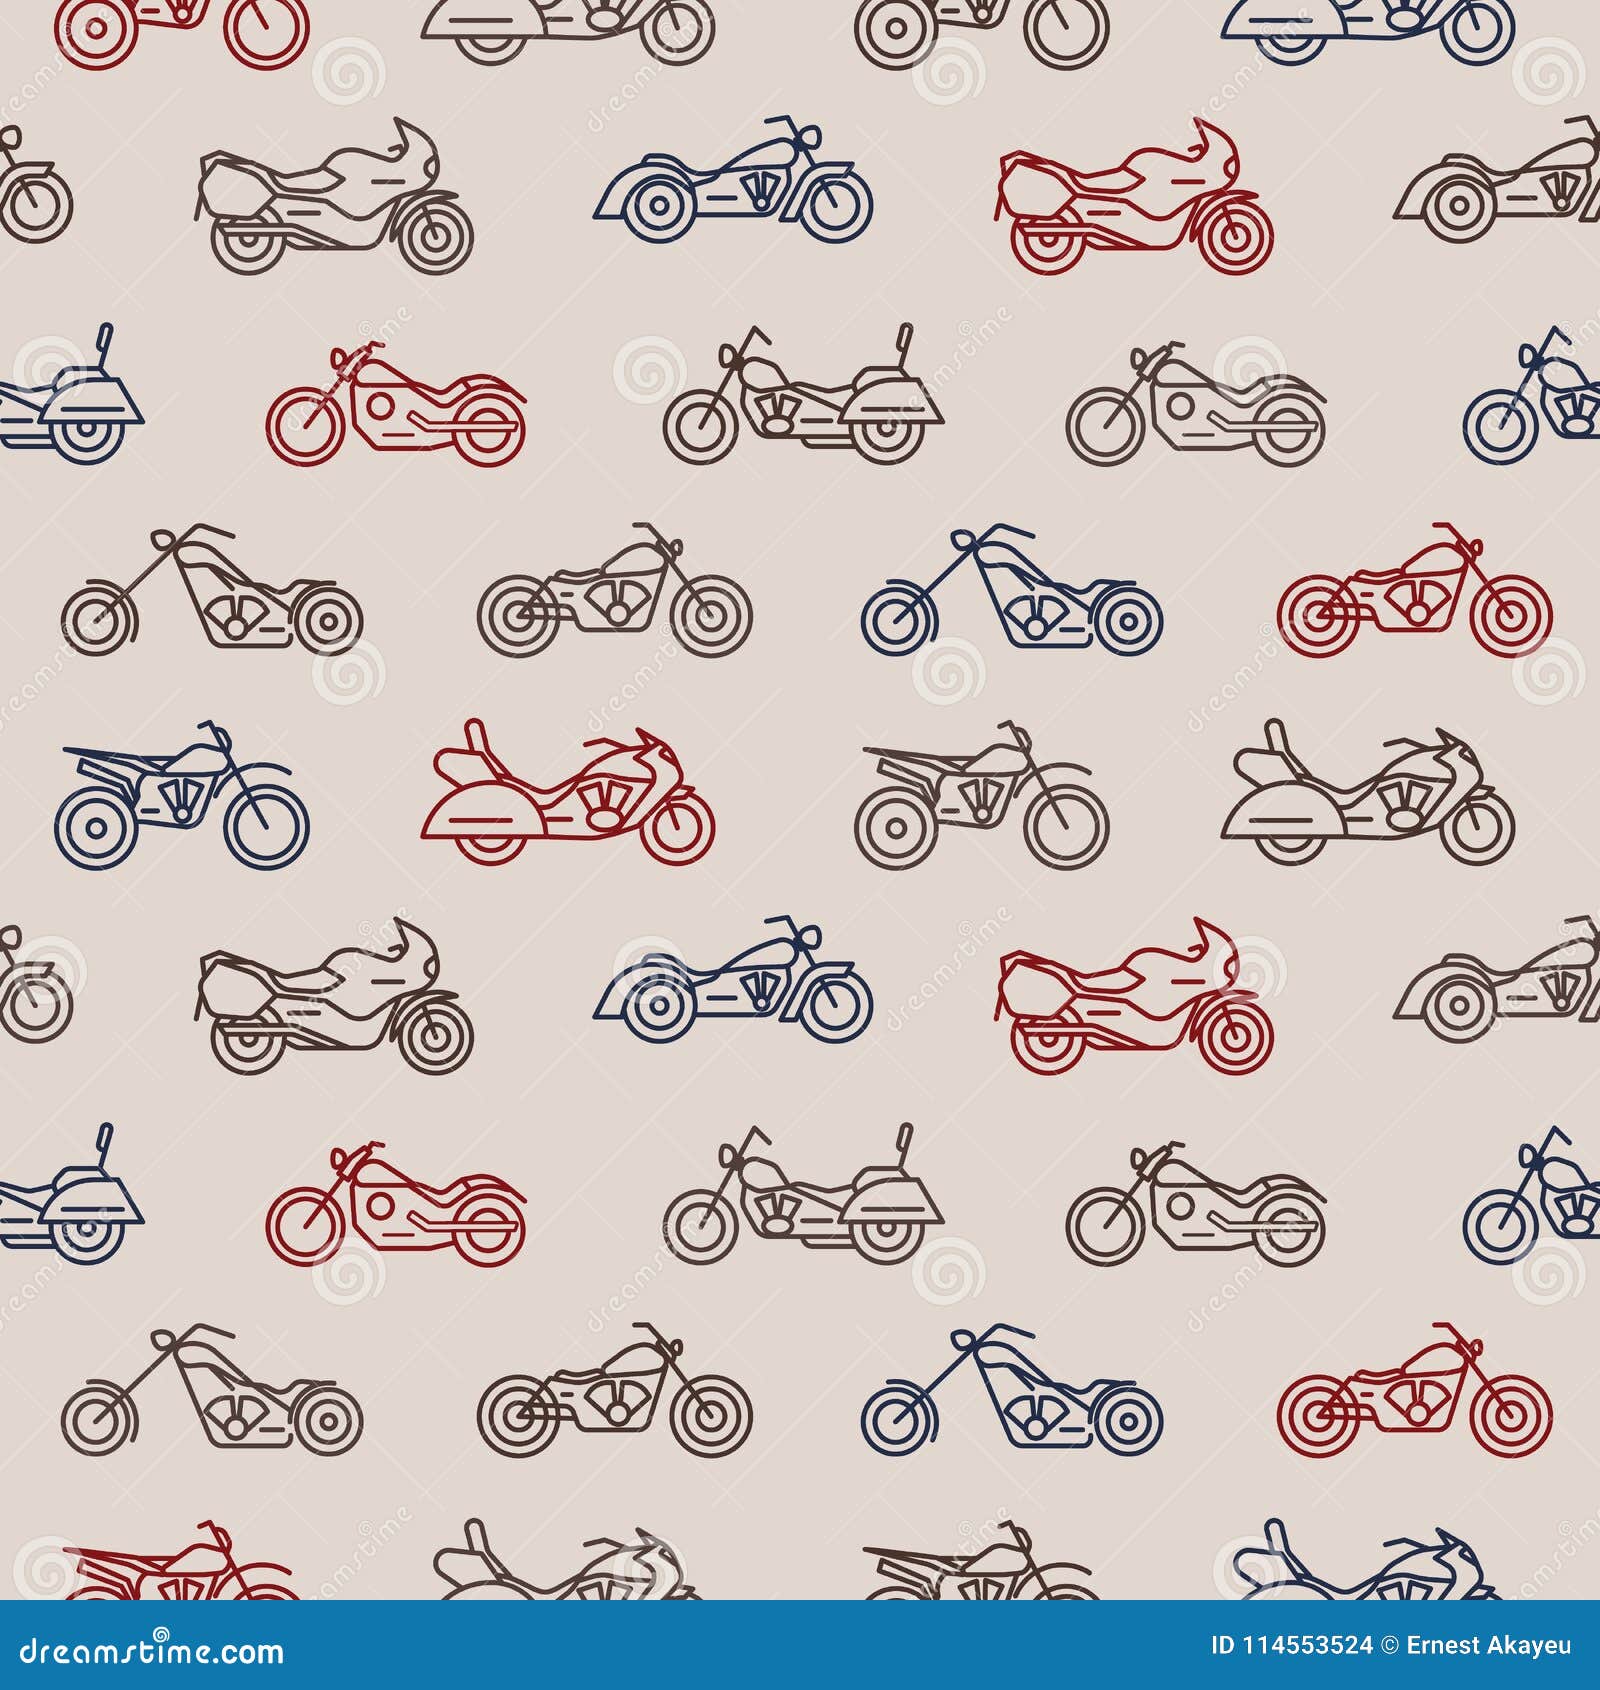 Seamless Pattern with Motorcycles of Different Models Drawn with